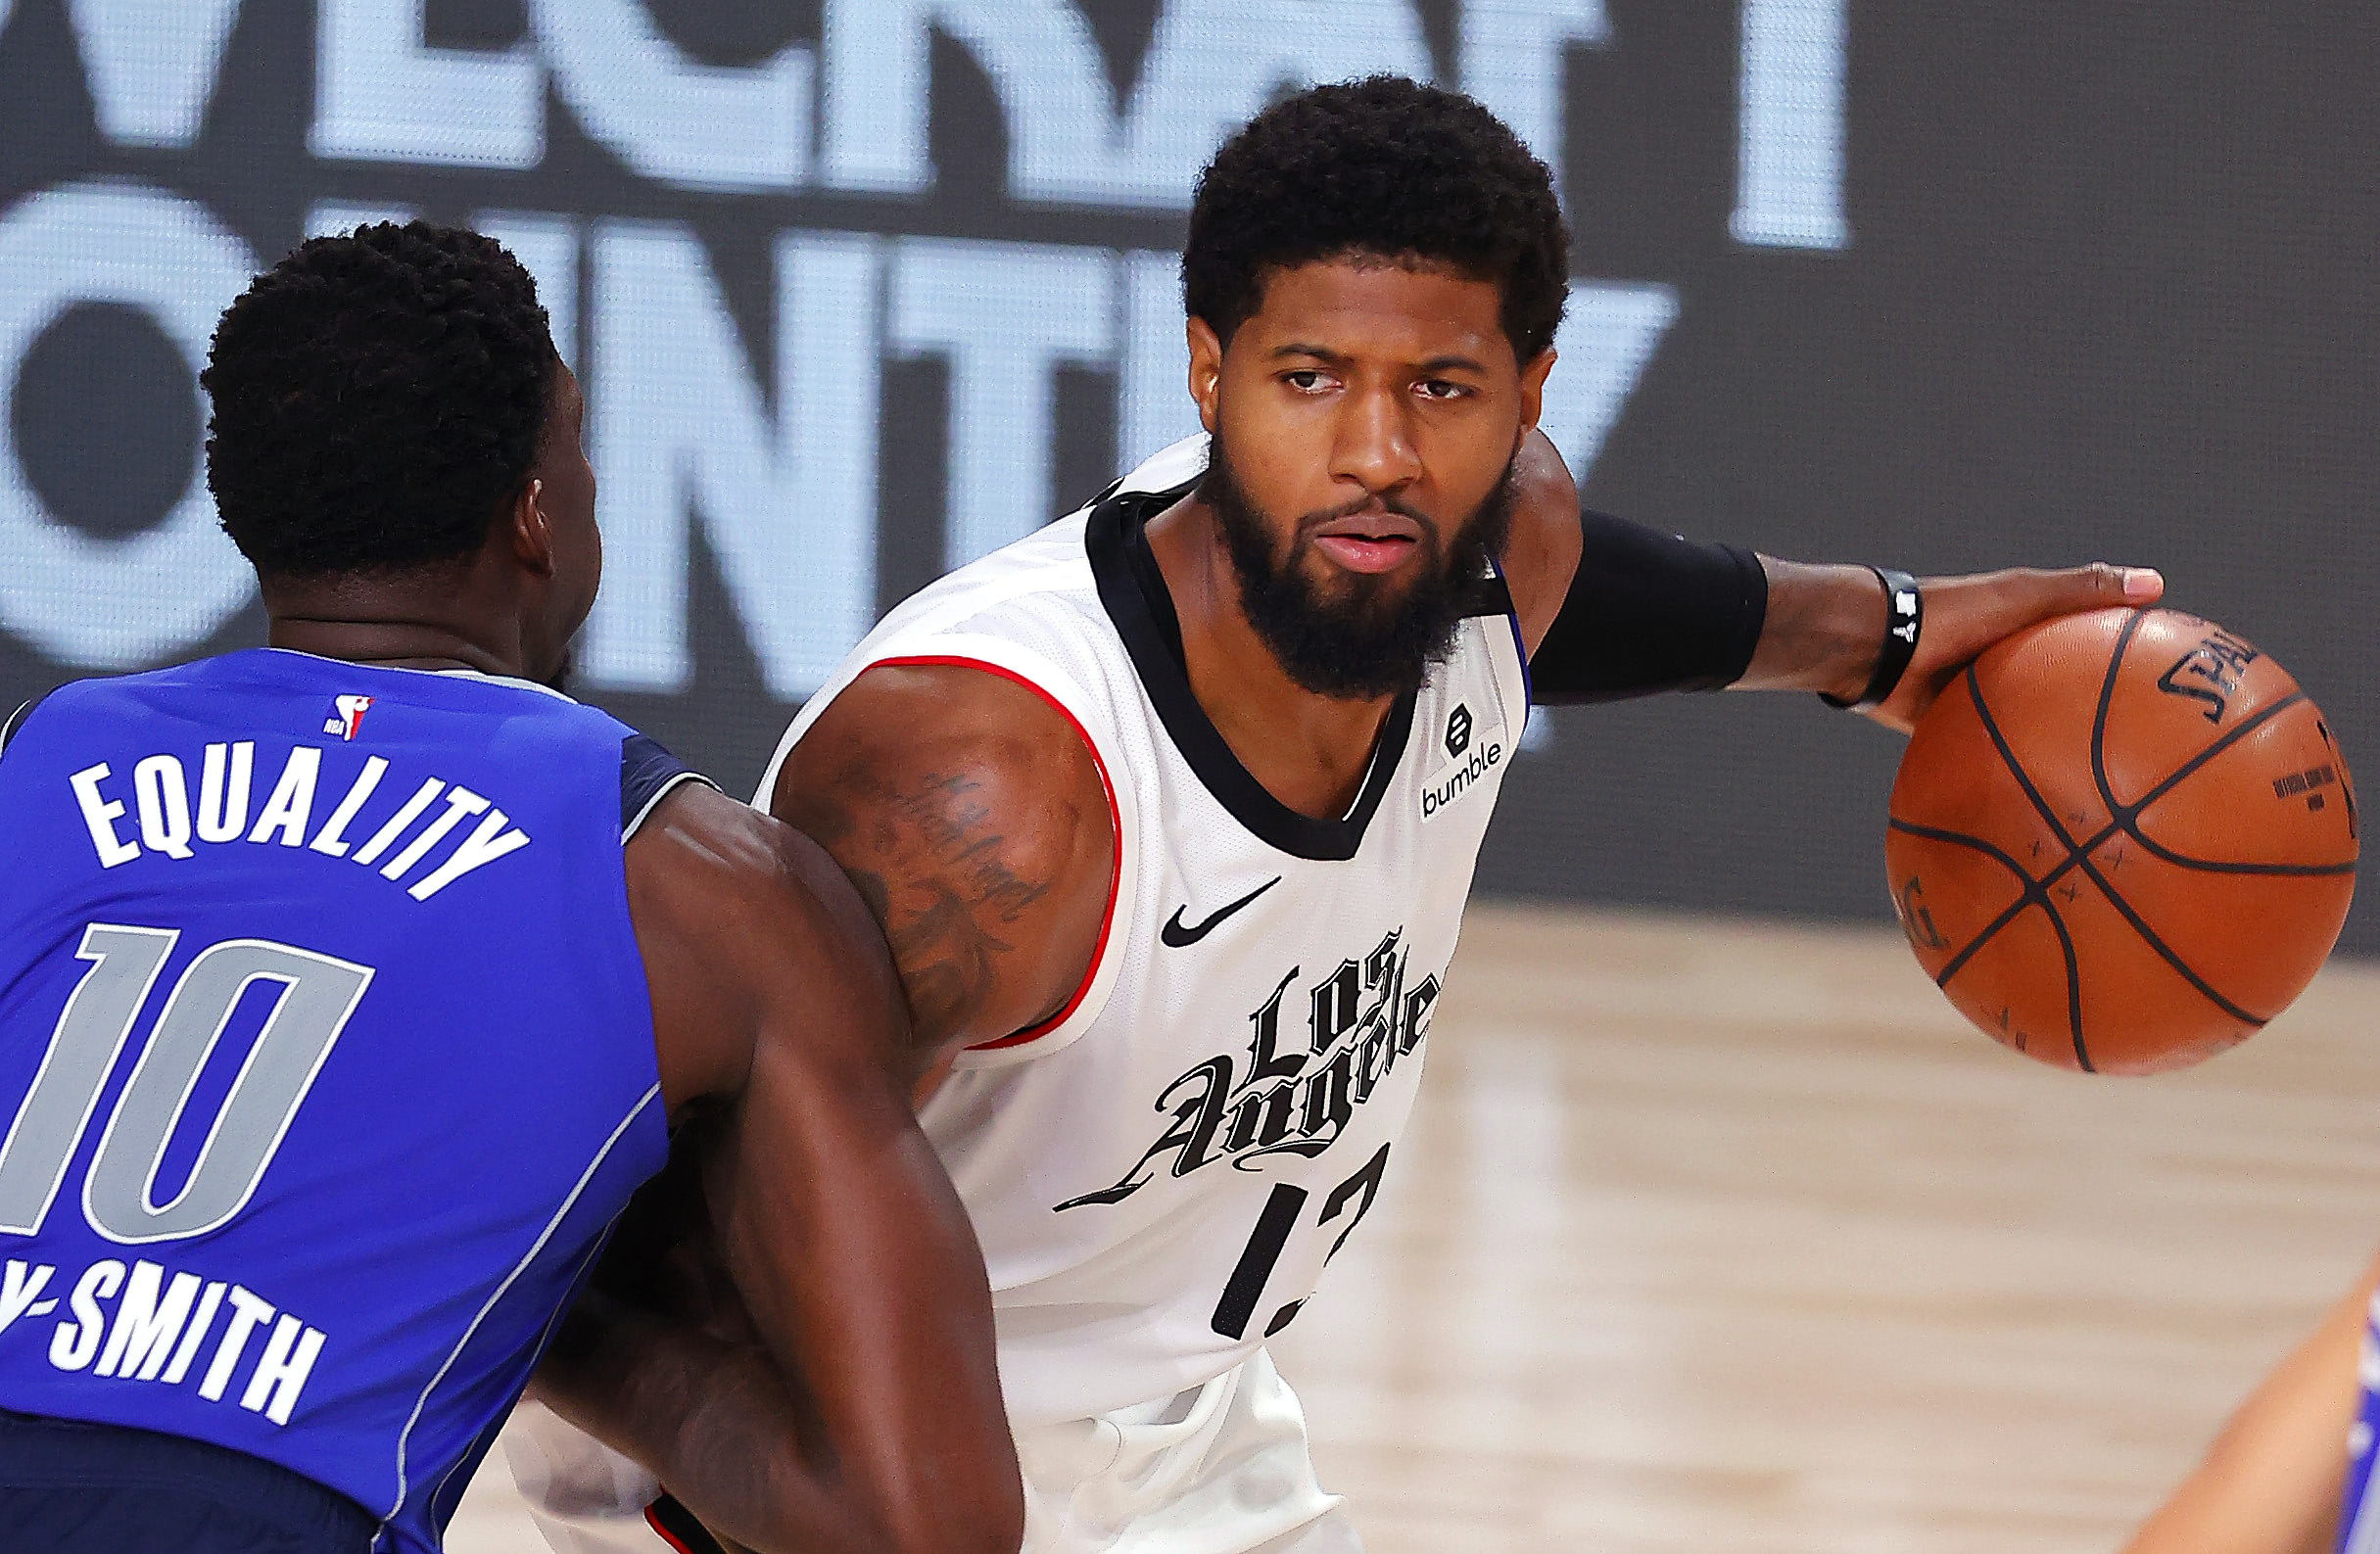 It’s Time for Paul George To Prove He’s the Star People Think He Is